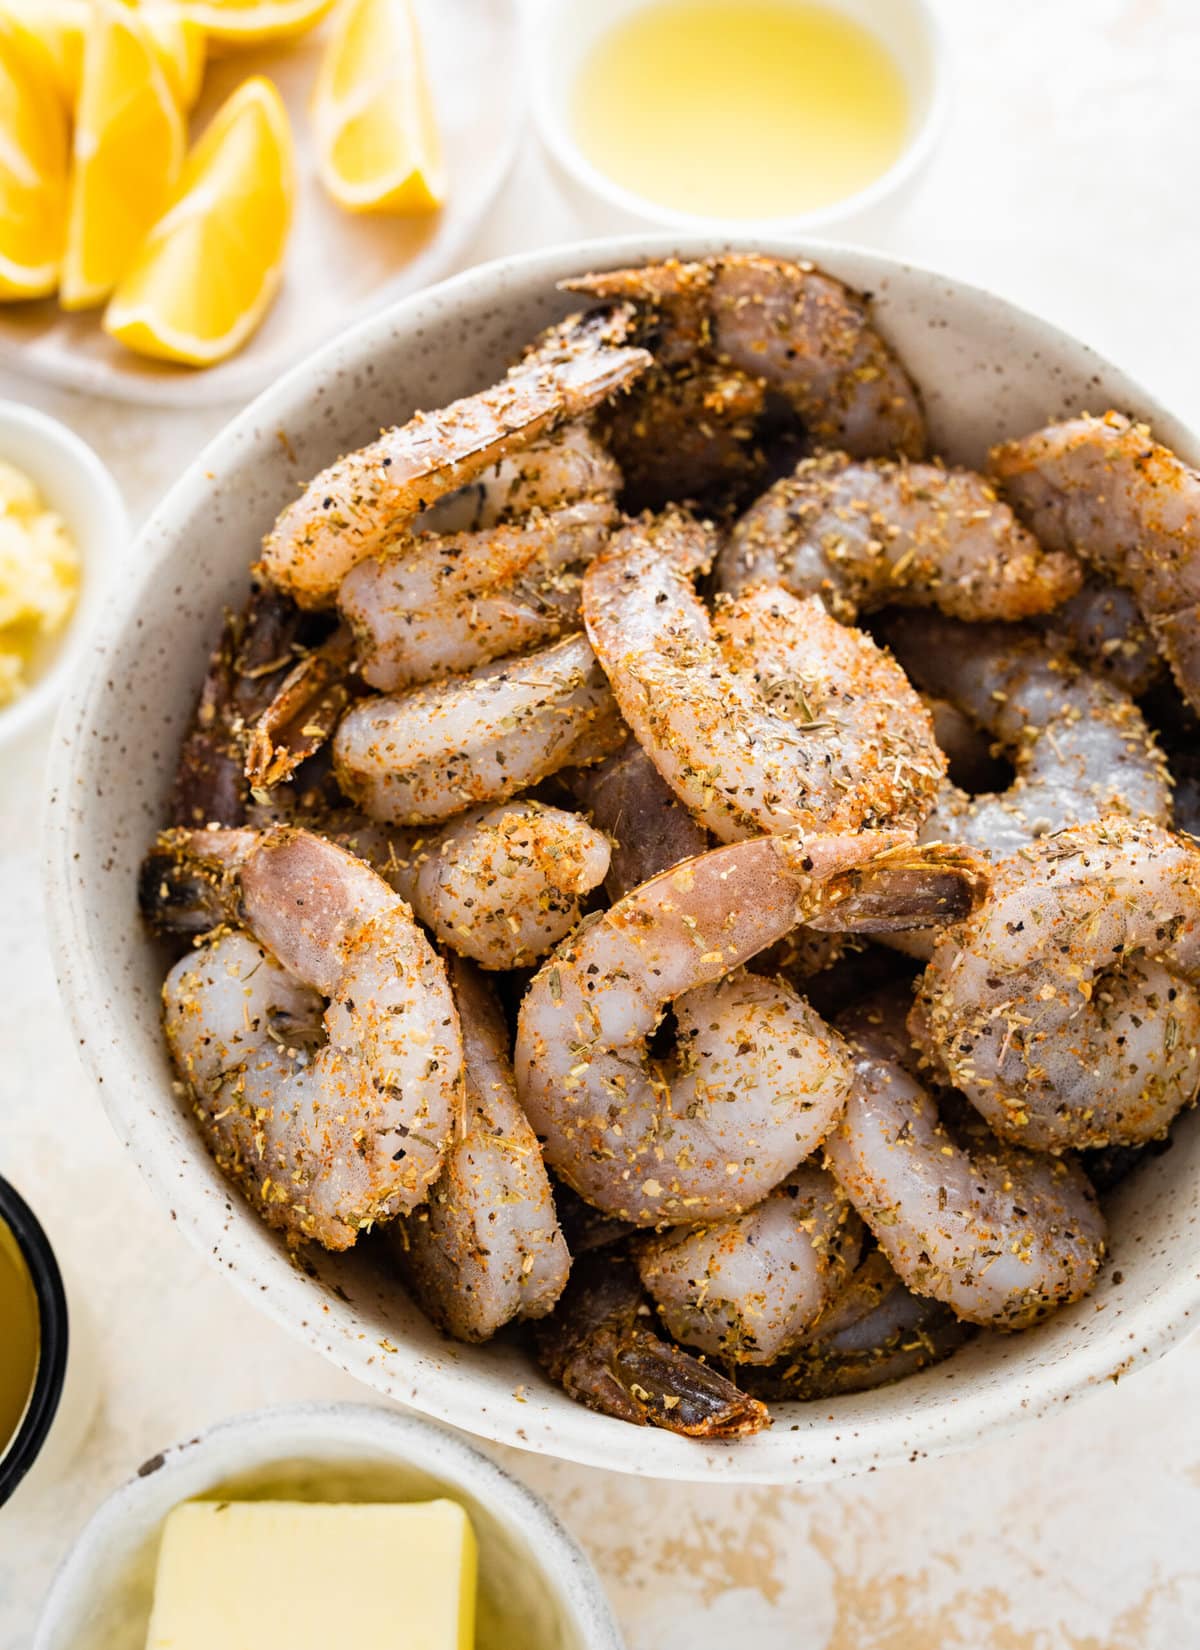 How to make easy pan seared shrimp step-by-step: mixing the shrimp and spice mix.